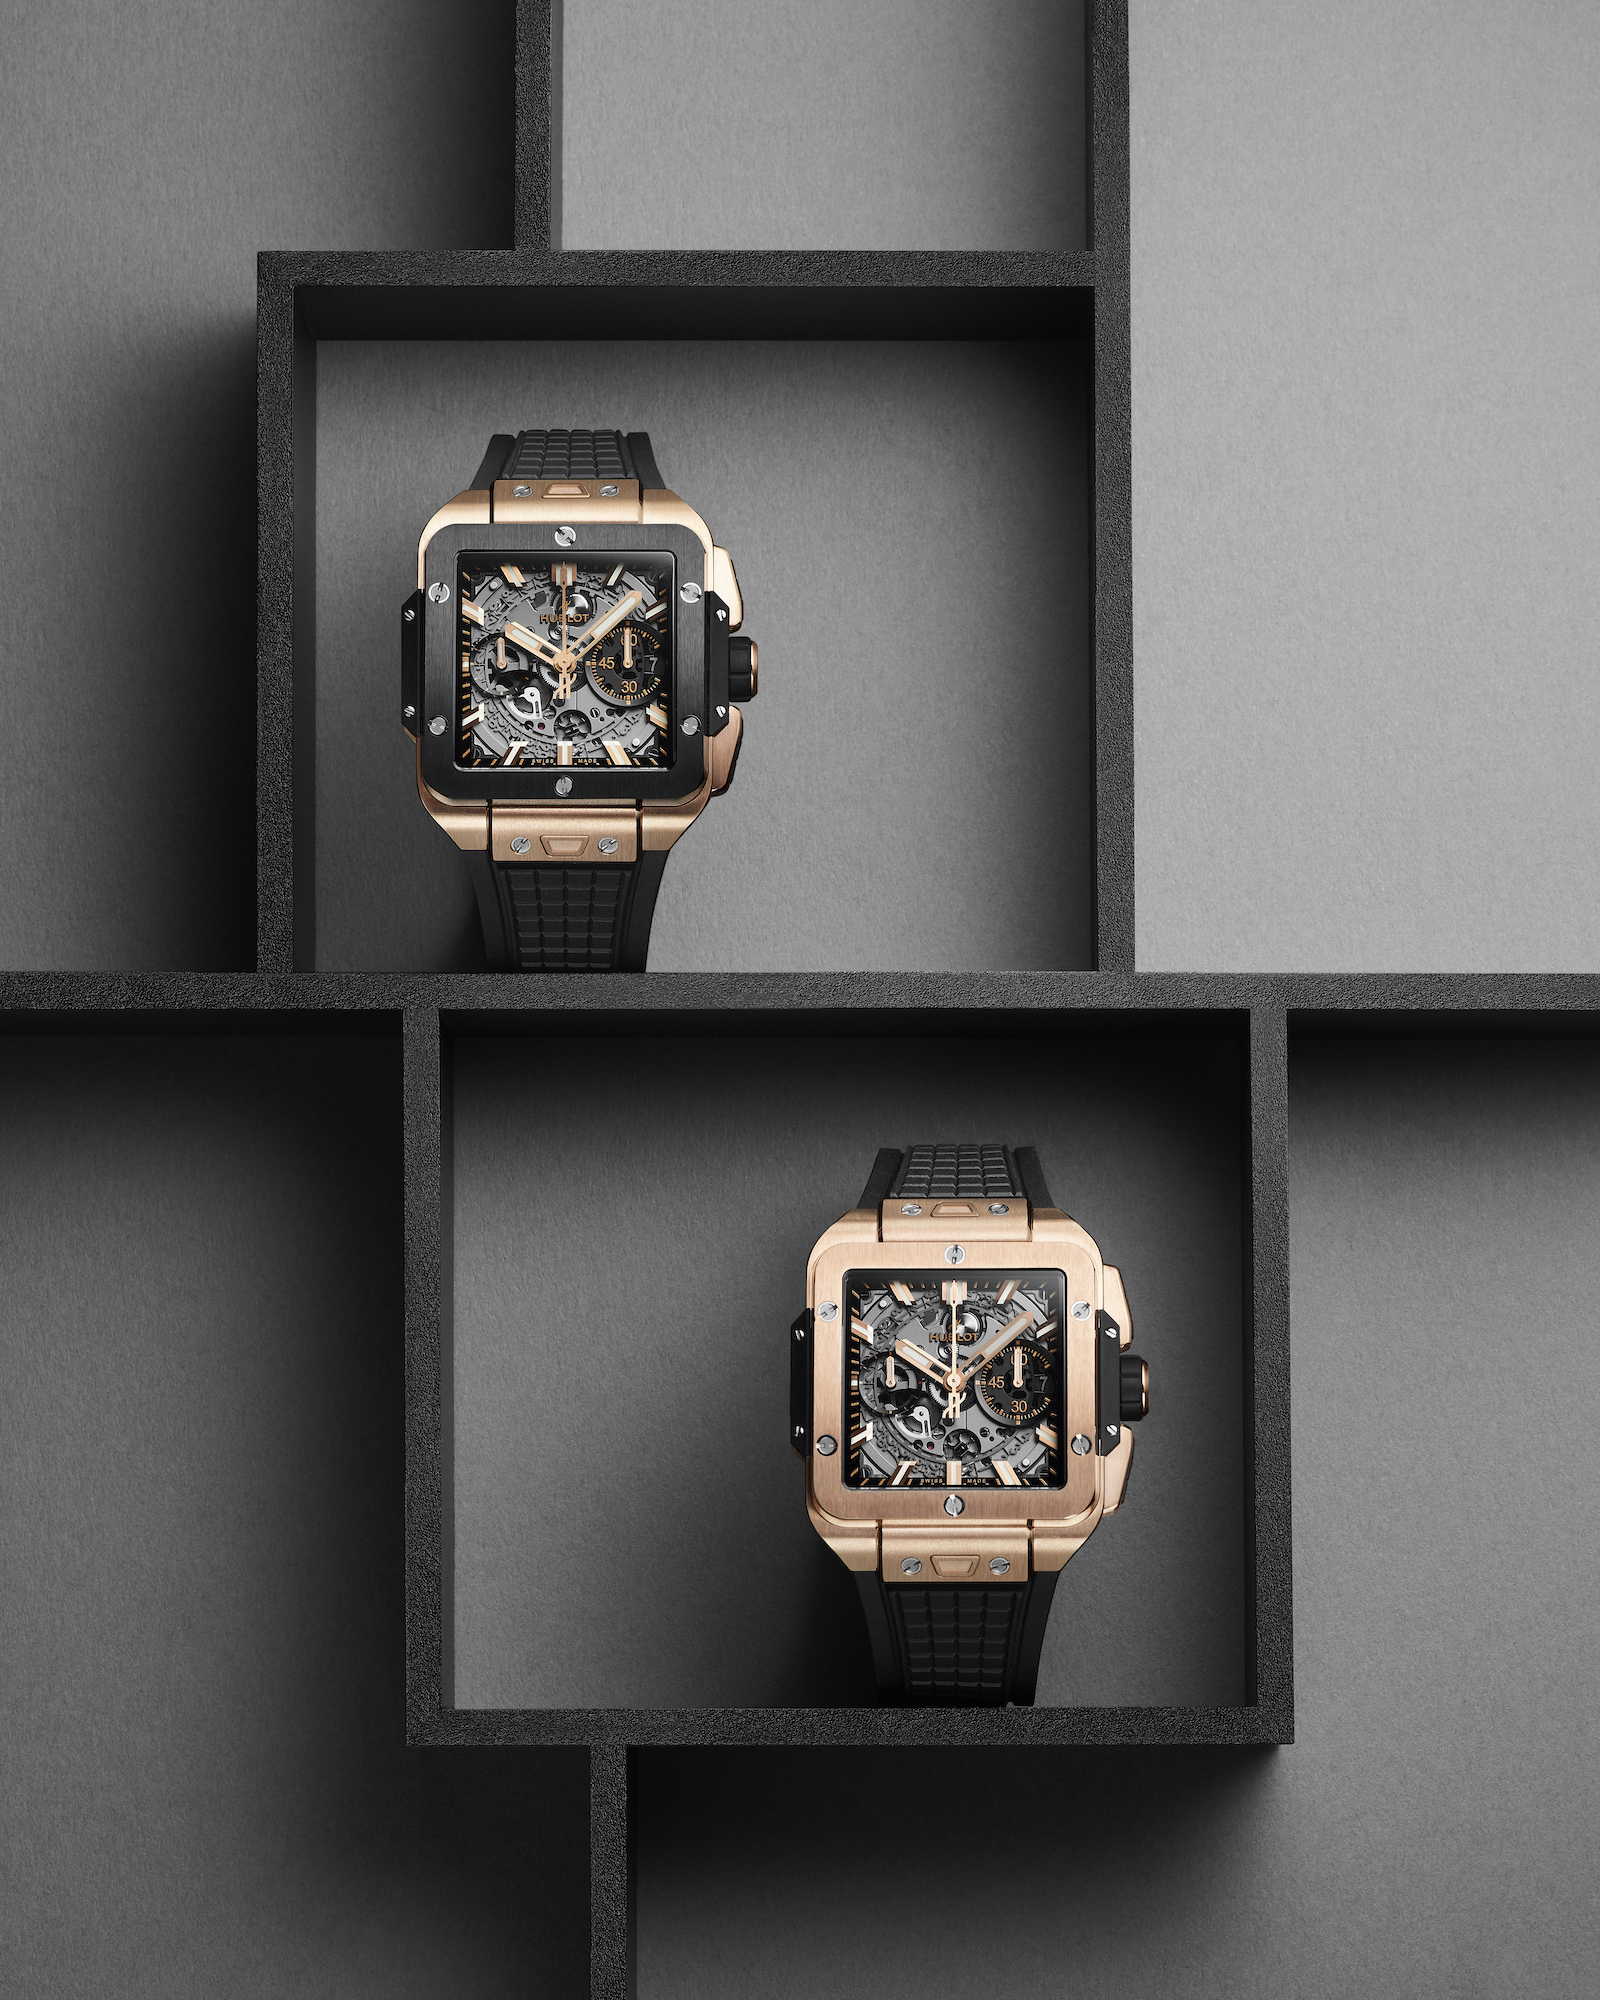 Hublot Square Bang Unico Collection 821.OM.0180.RX - 821.OX.0180.RX